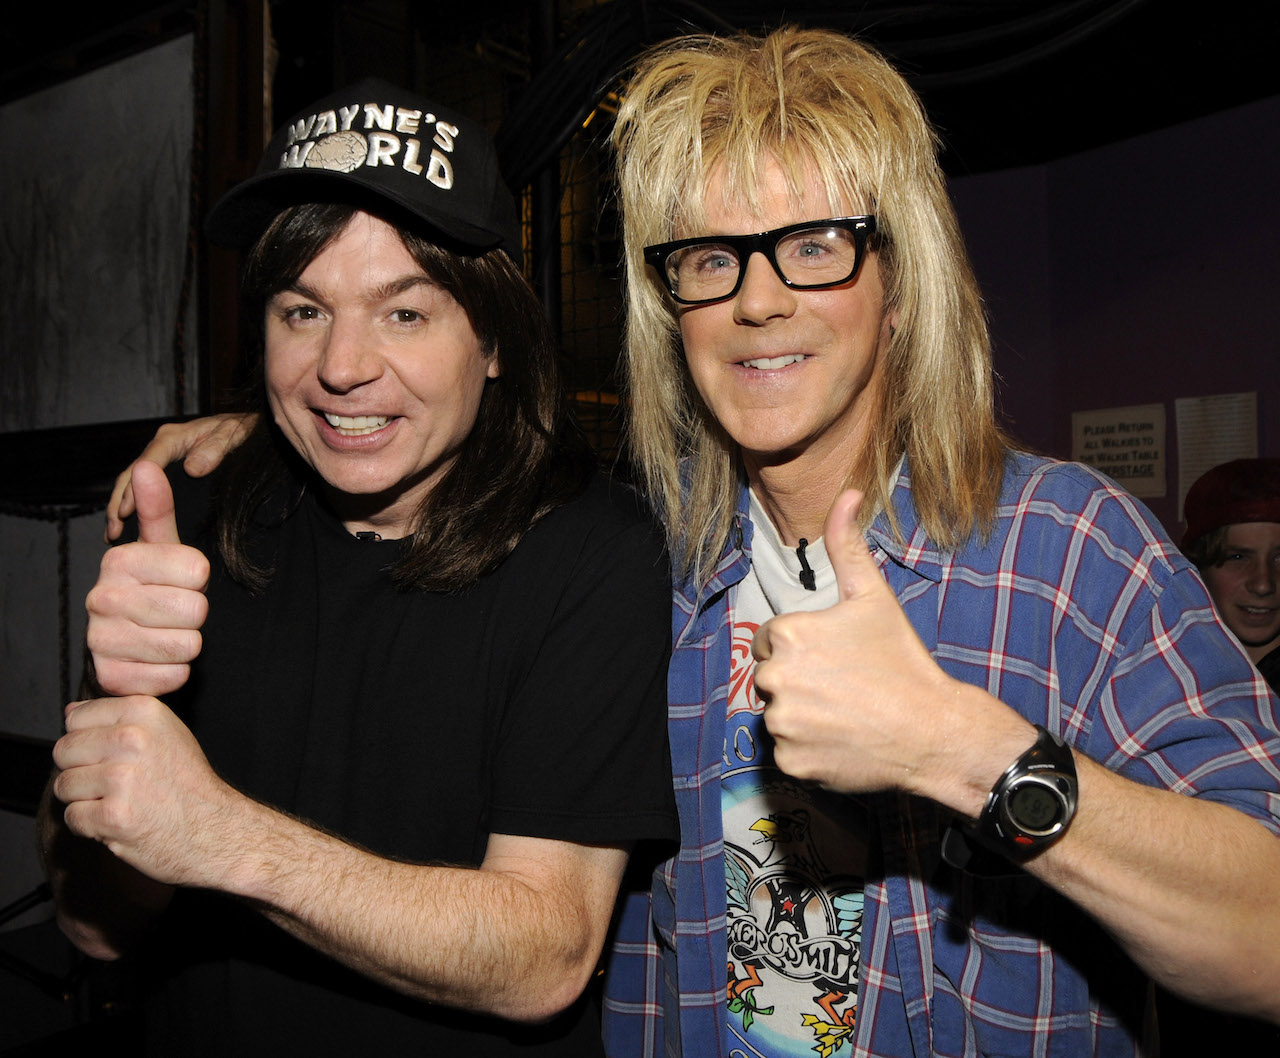 Mike Myers and Dana Carvey as characters Wayne and Garth from 'Wayne's World'